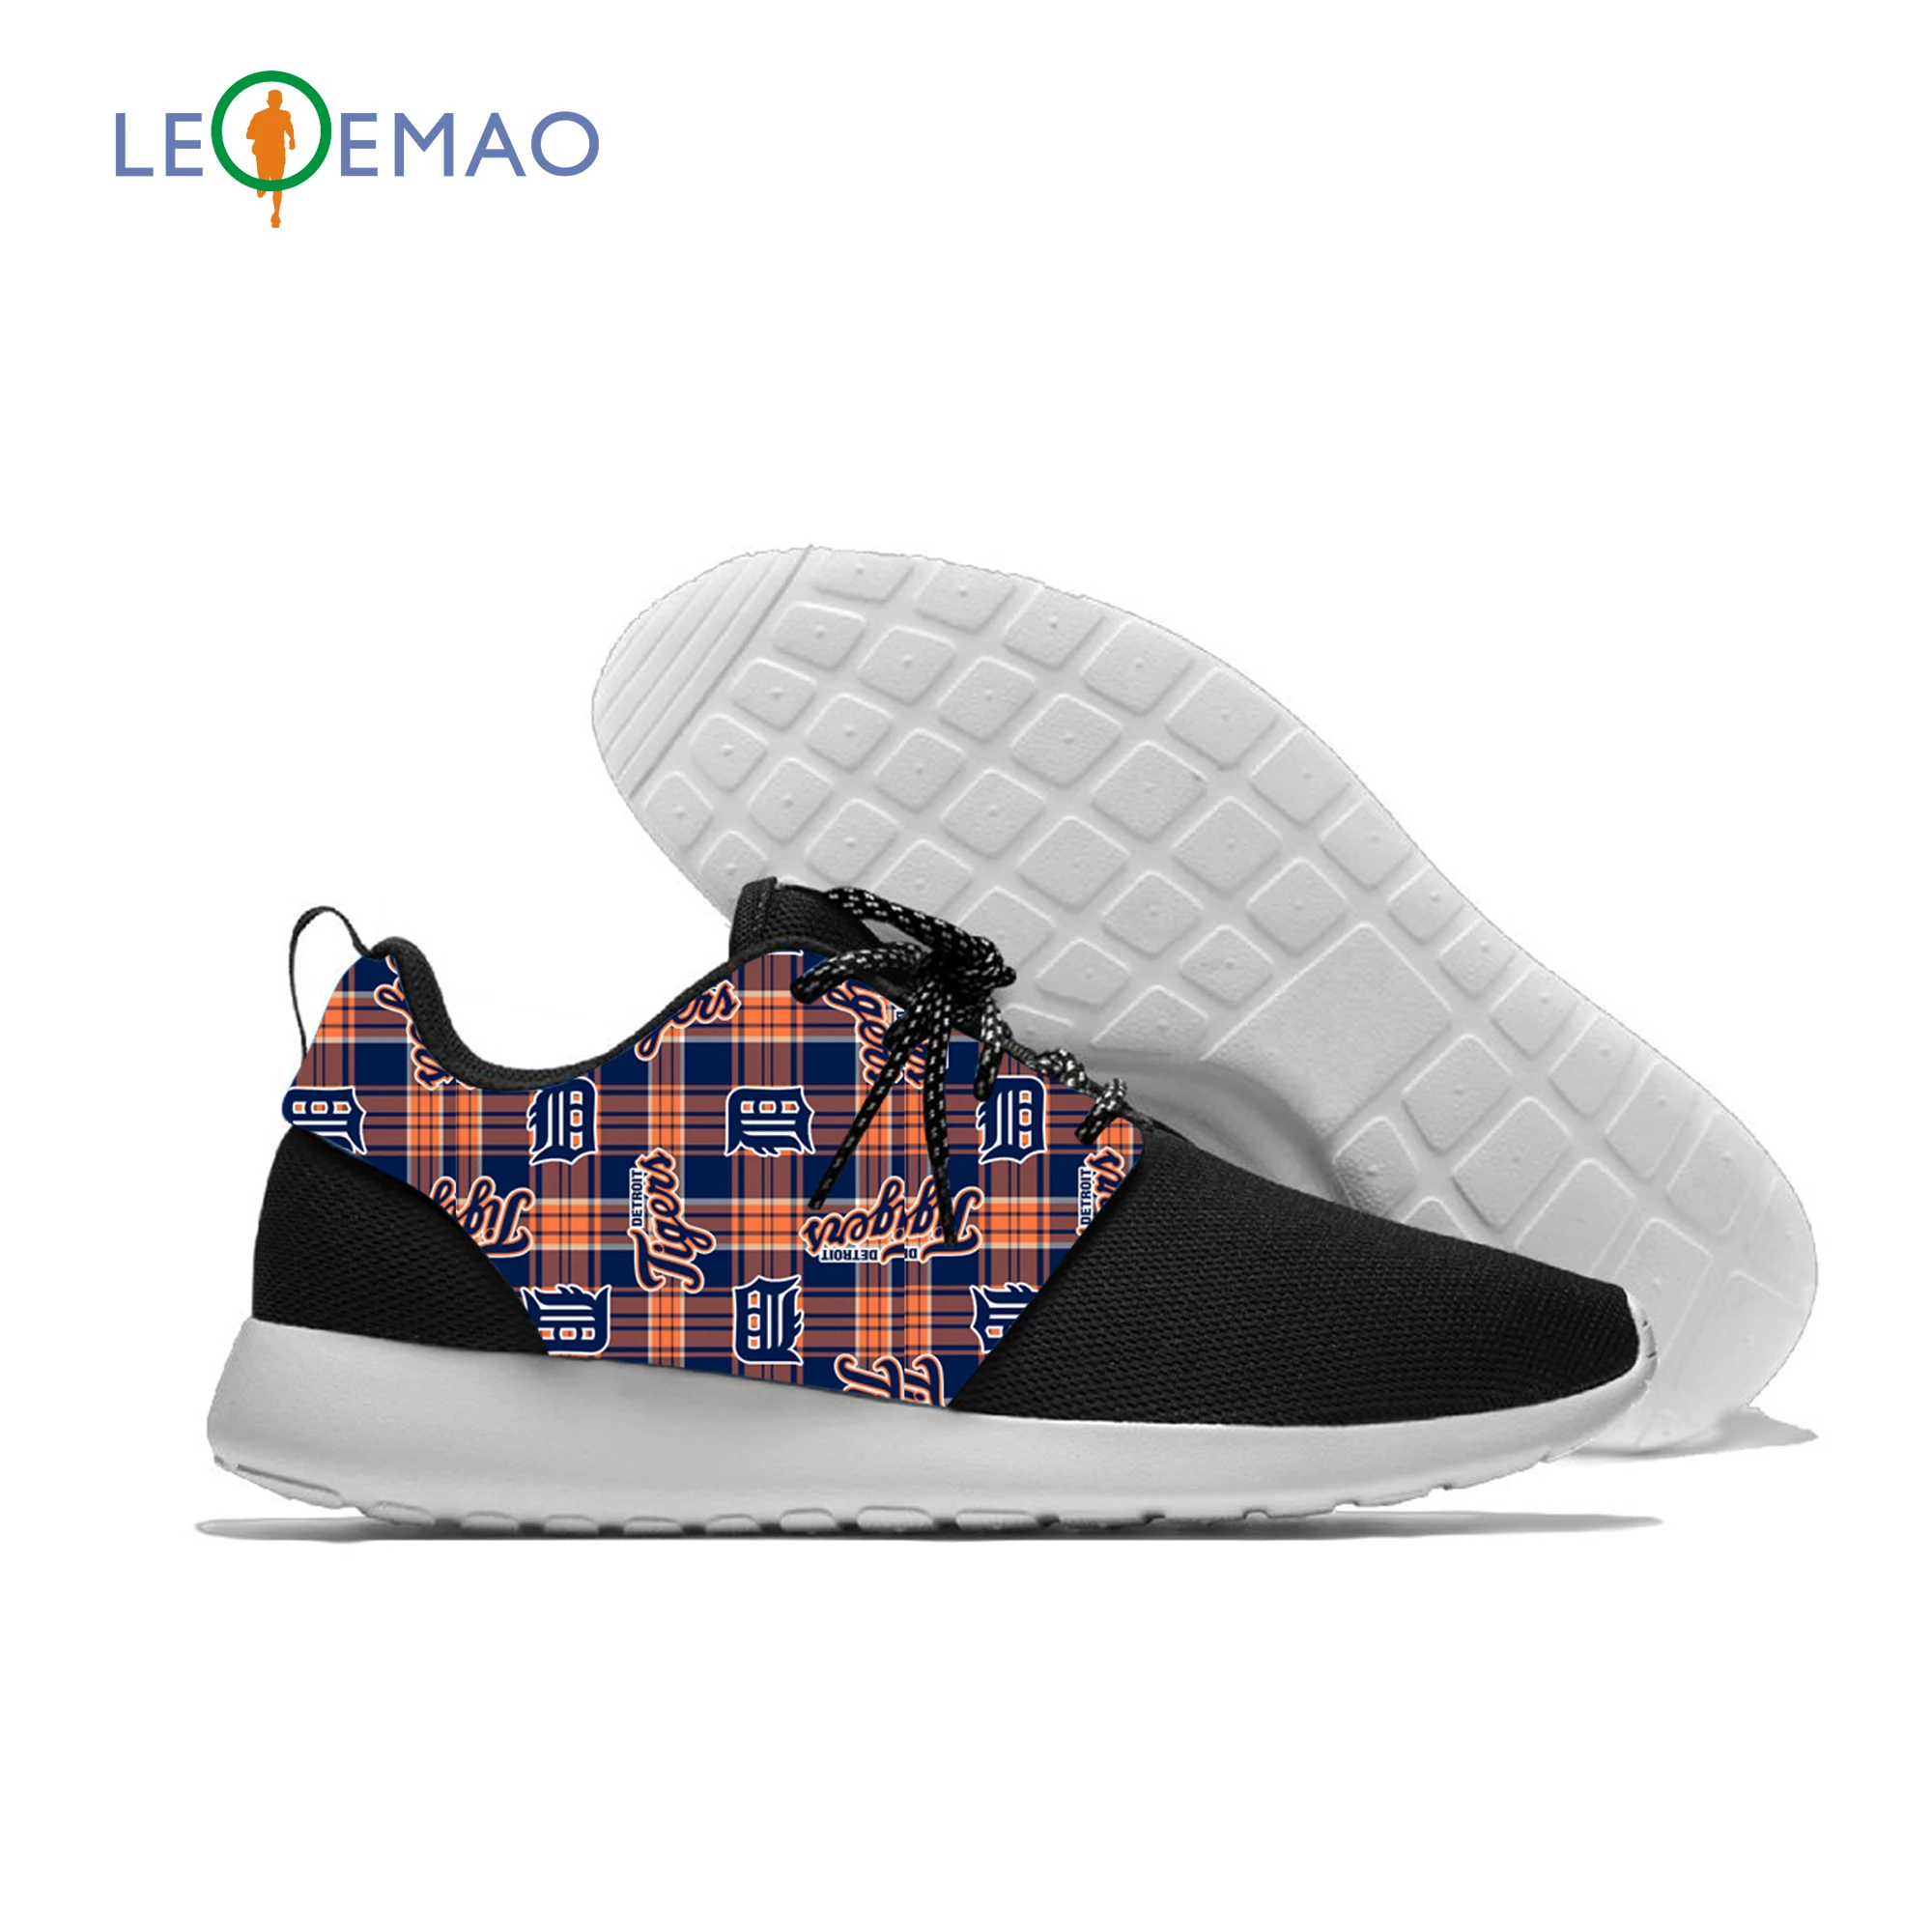 

2020 Mens Women Fashion Print Tigers Logo Sneakers Comfortable Baltimore Lace-Up Unisex Shoes For Detroit Baseball Team Fans